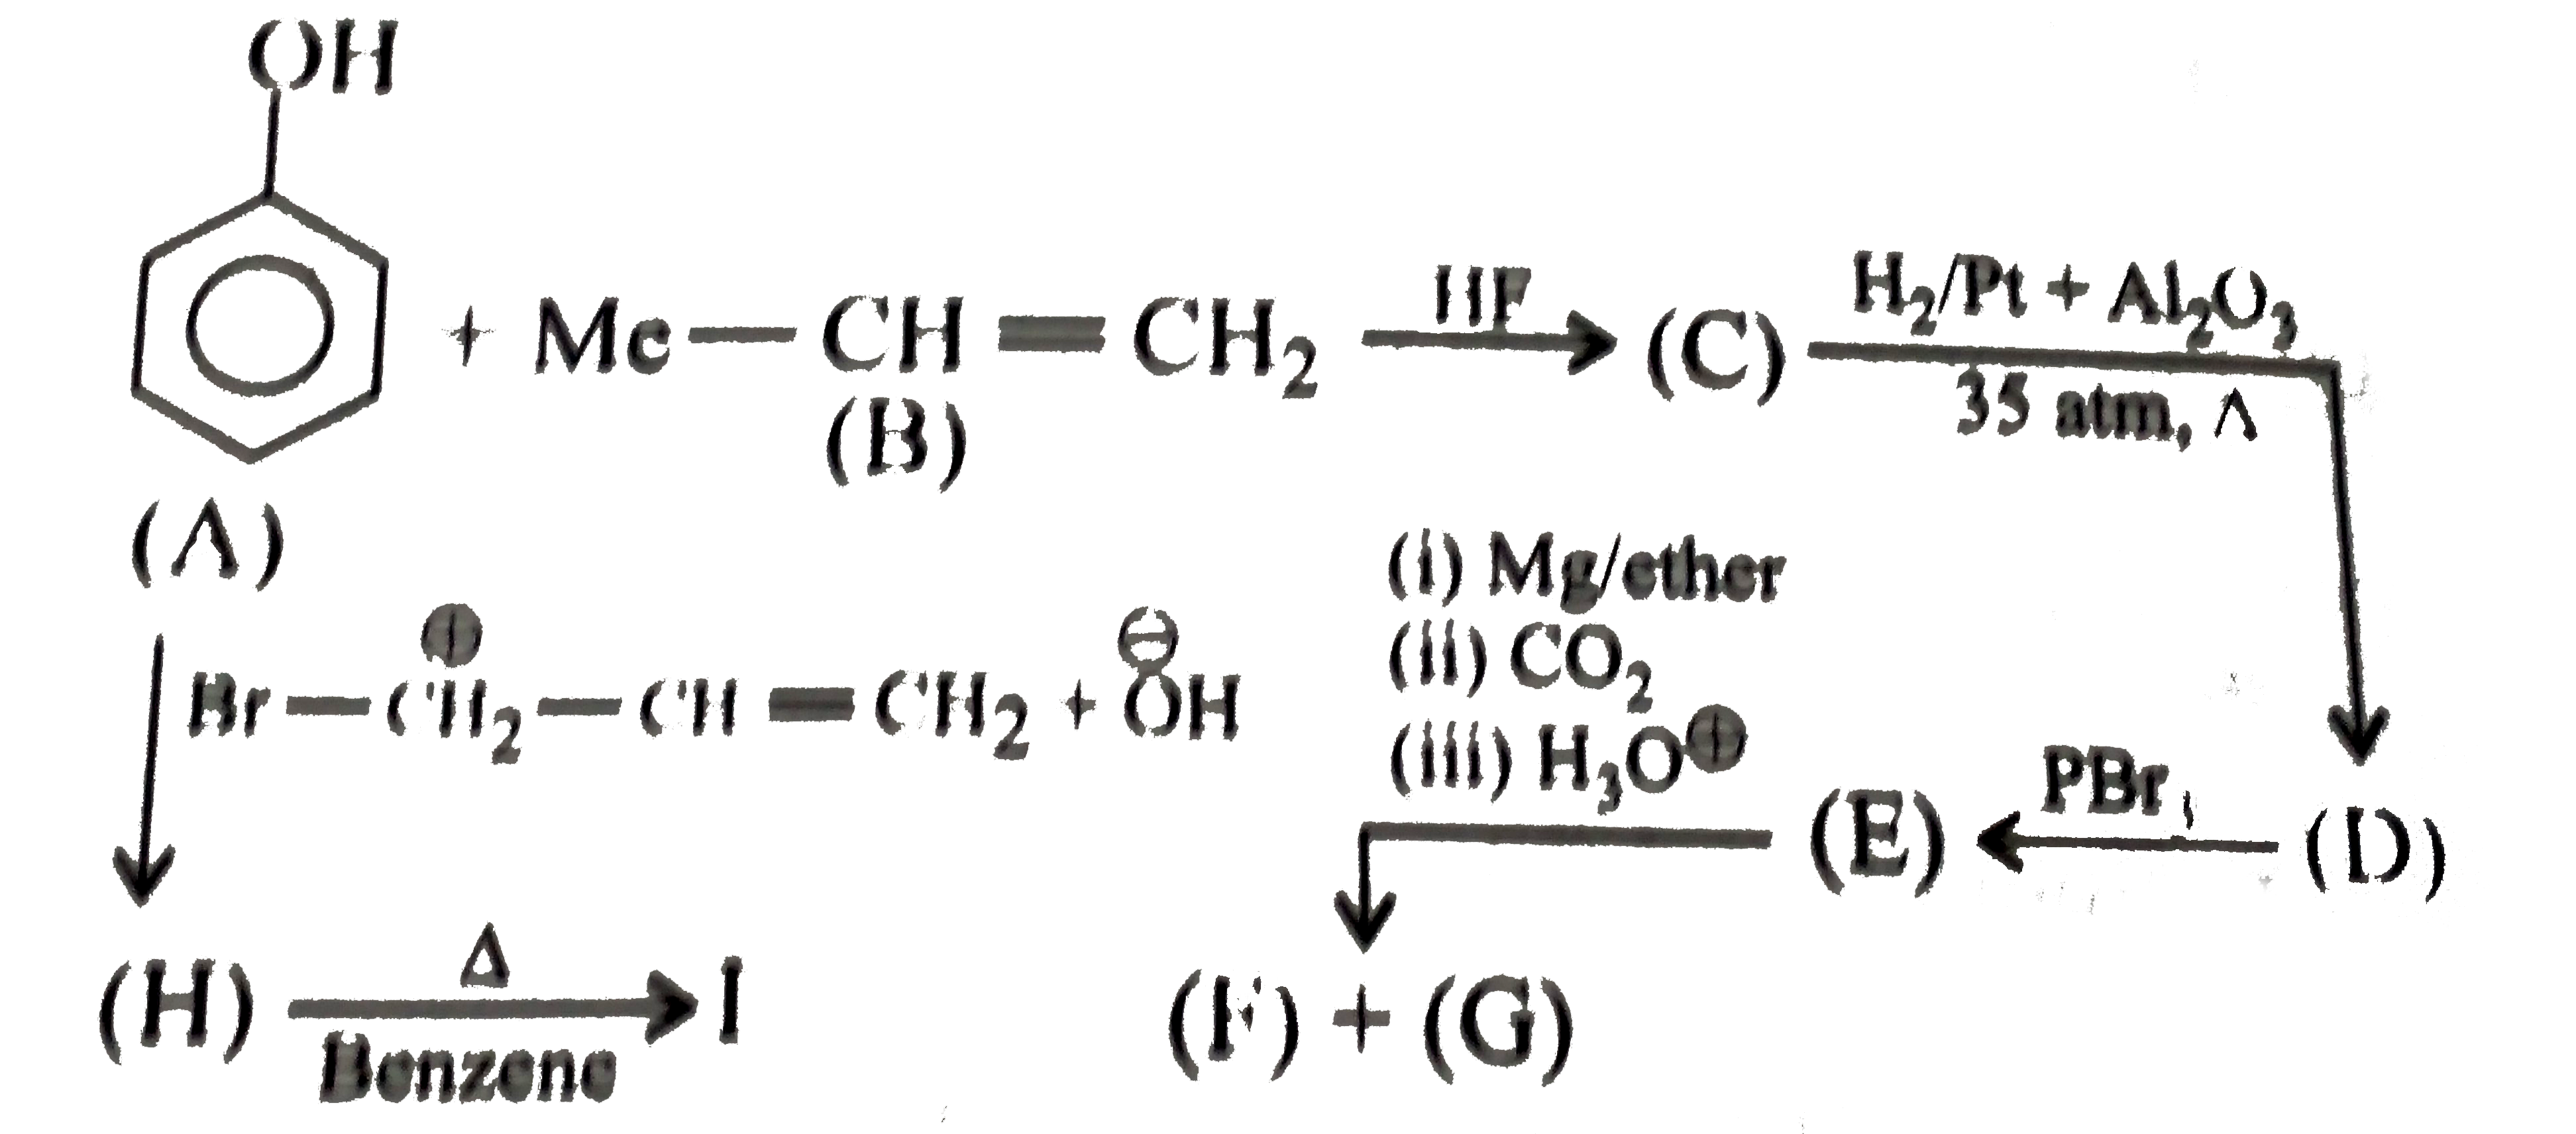 The reaction and mechanism involved in the formation of the compound (I) form (H), respectively, are: